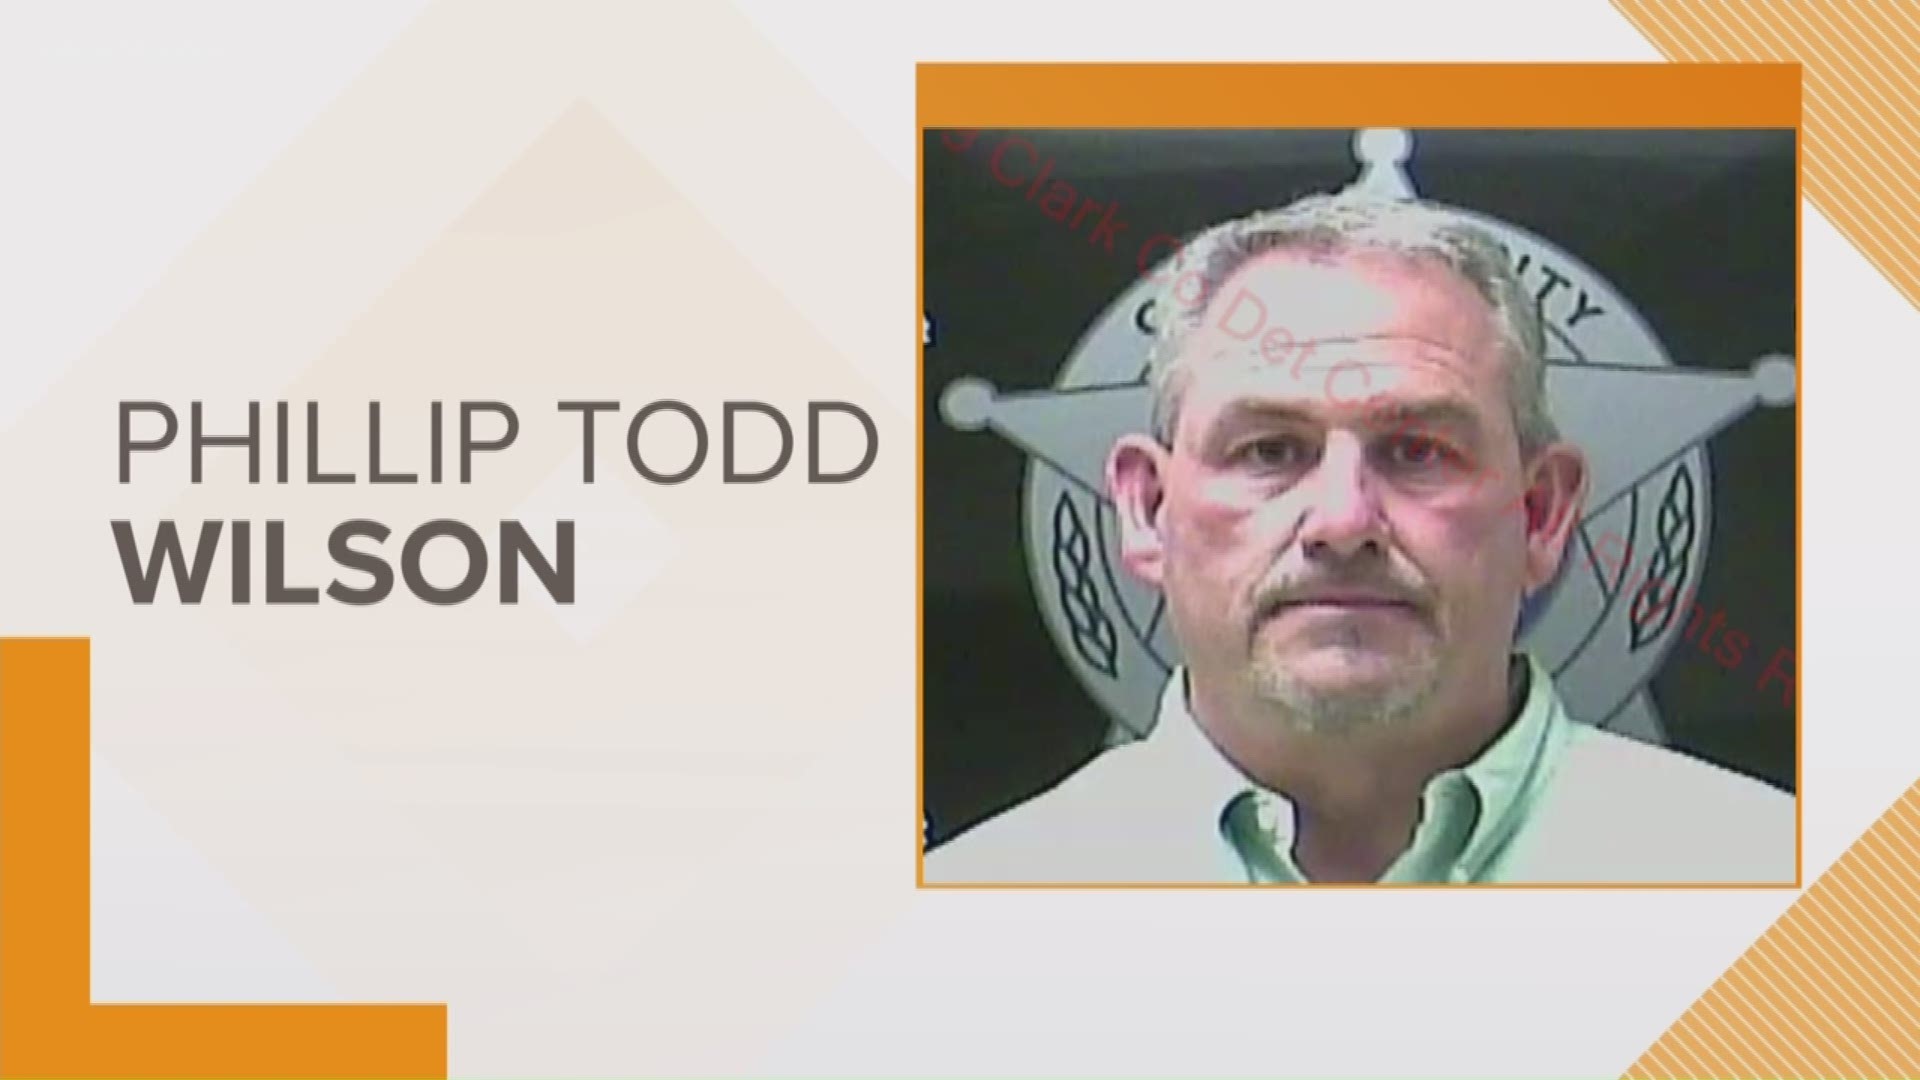 KSP said they received a complaint from someone at Clark County Area Technology Center about principal Phillip Todd Wilson.